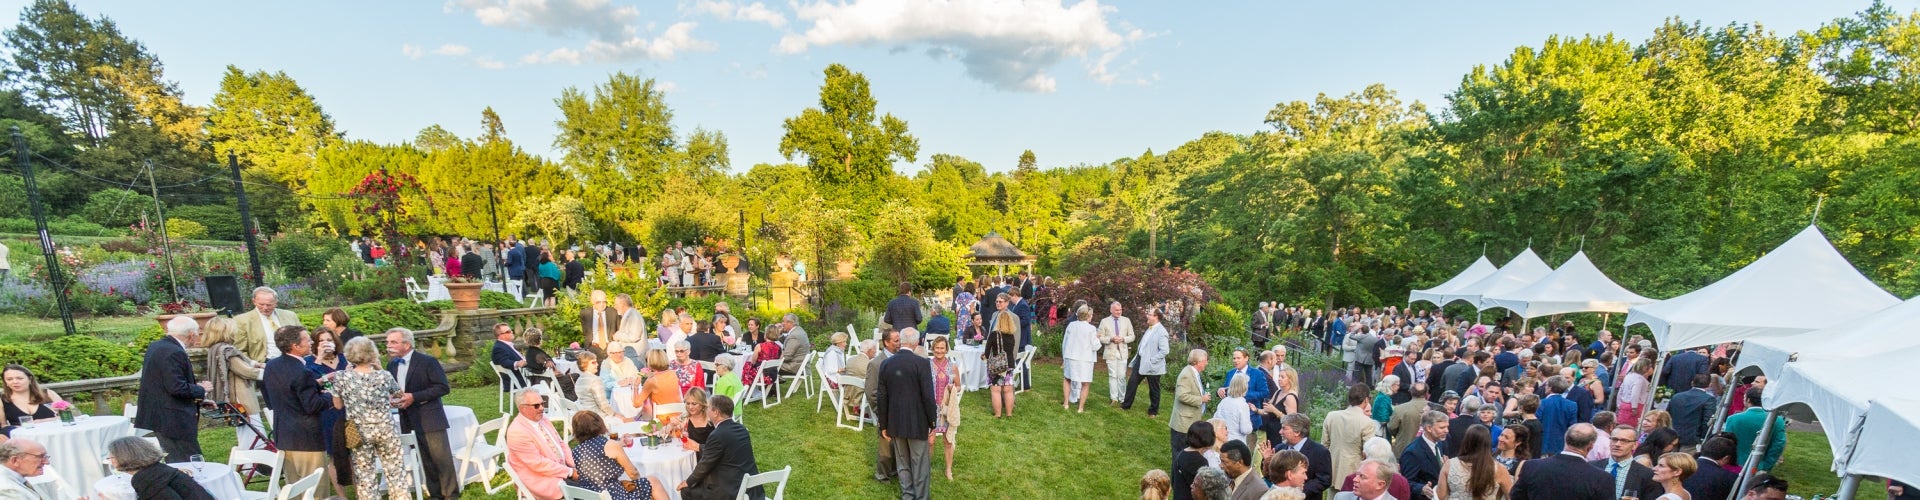 A large group of people mingle outdoors in a rose garden with tables, chairs, and tents. 